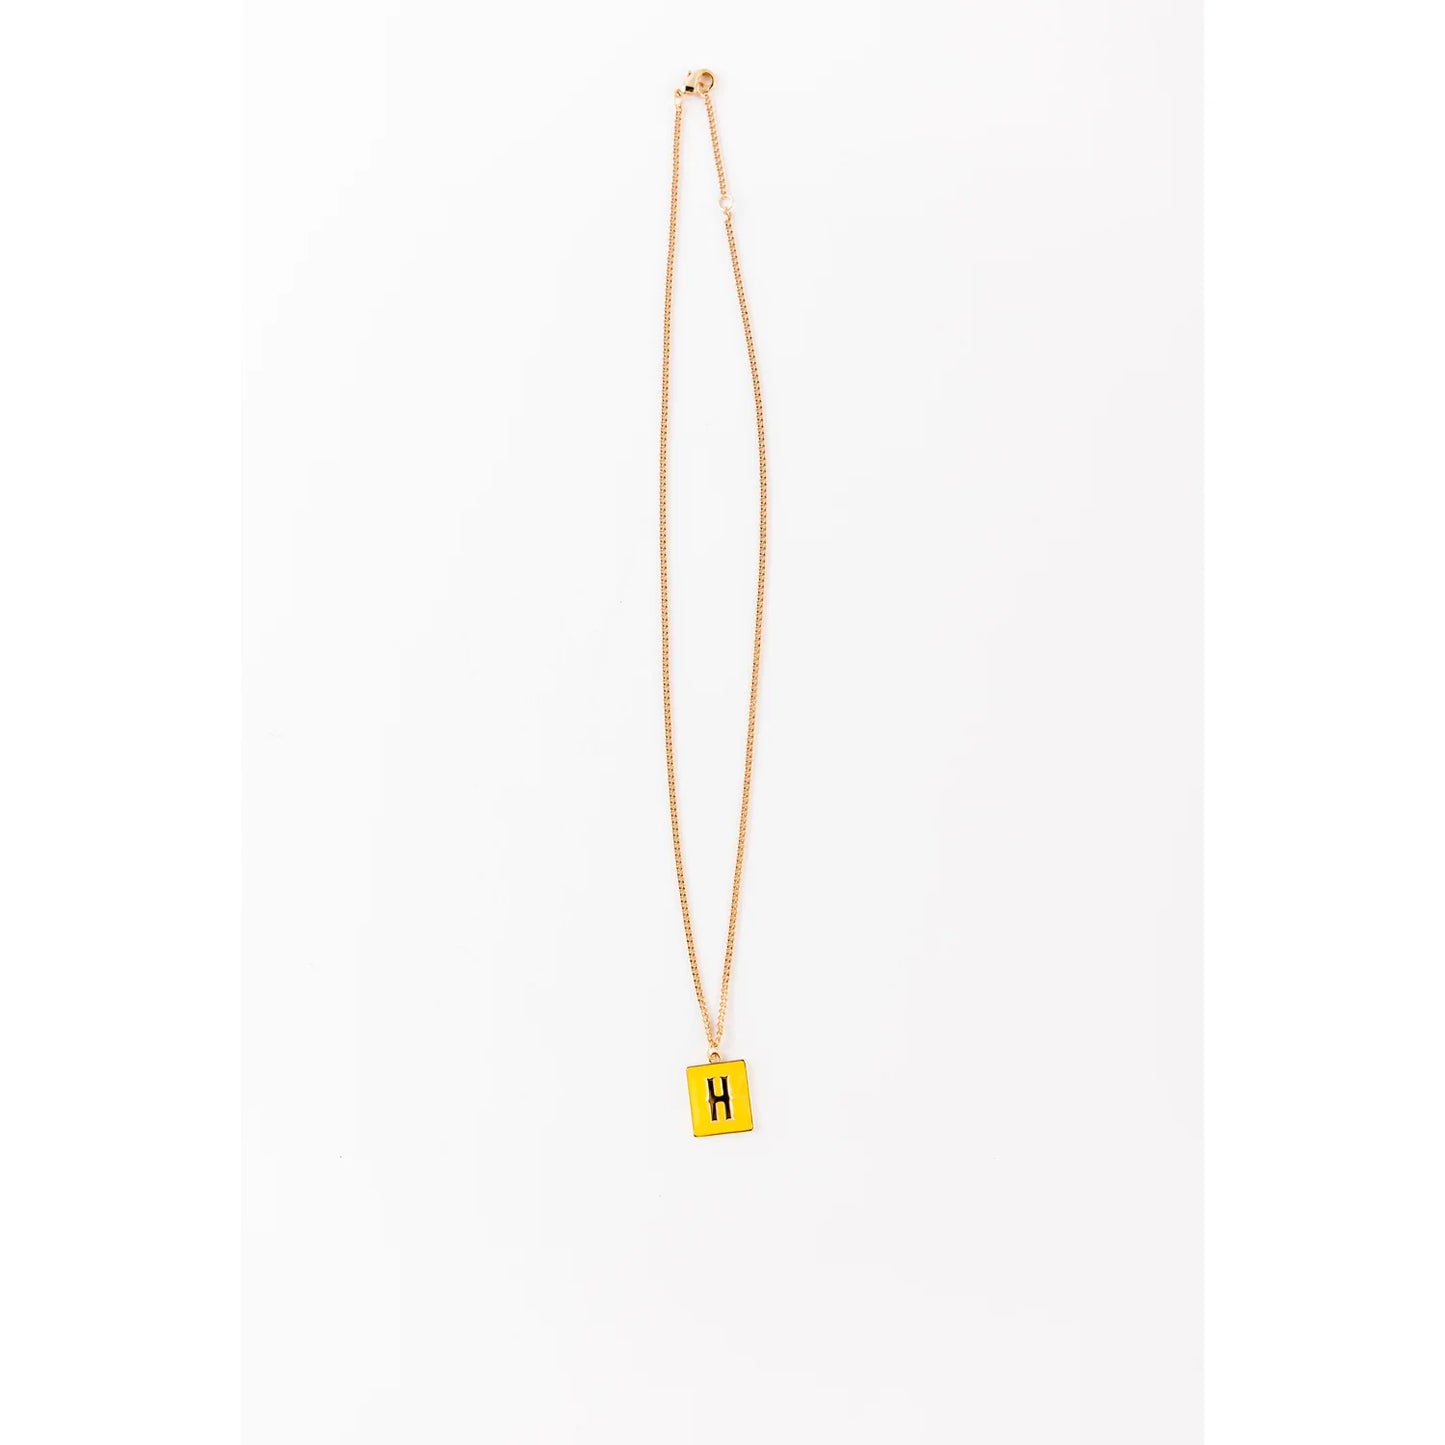 Michelle McDowell Vivey Necklace